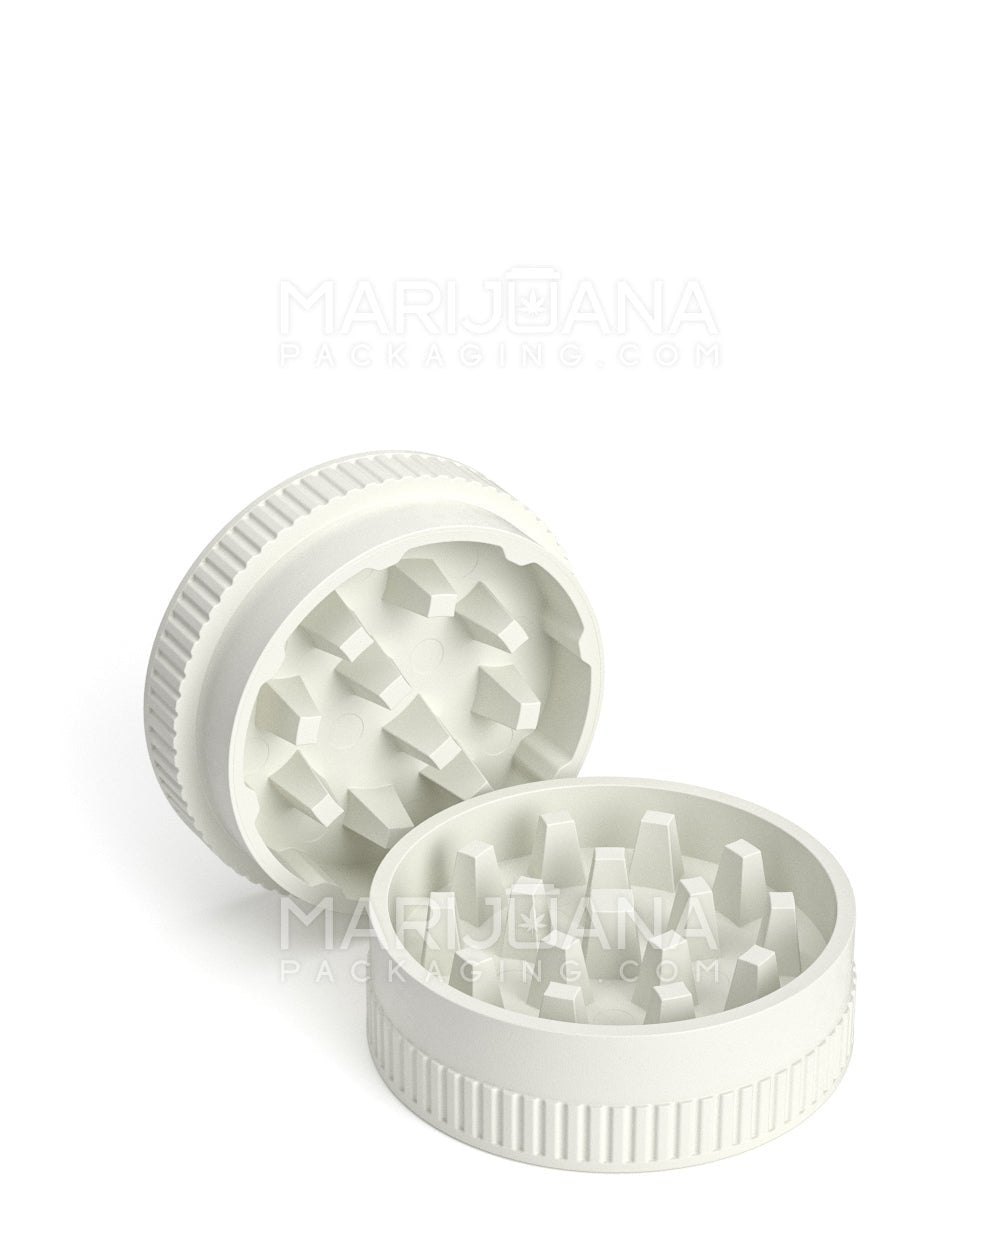 Biodegradable Thick Wall White Grinder | 2 Piece - 55mm - 12 Count - 6